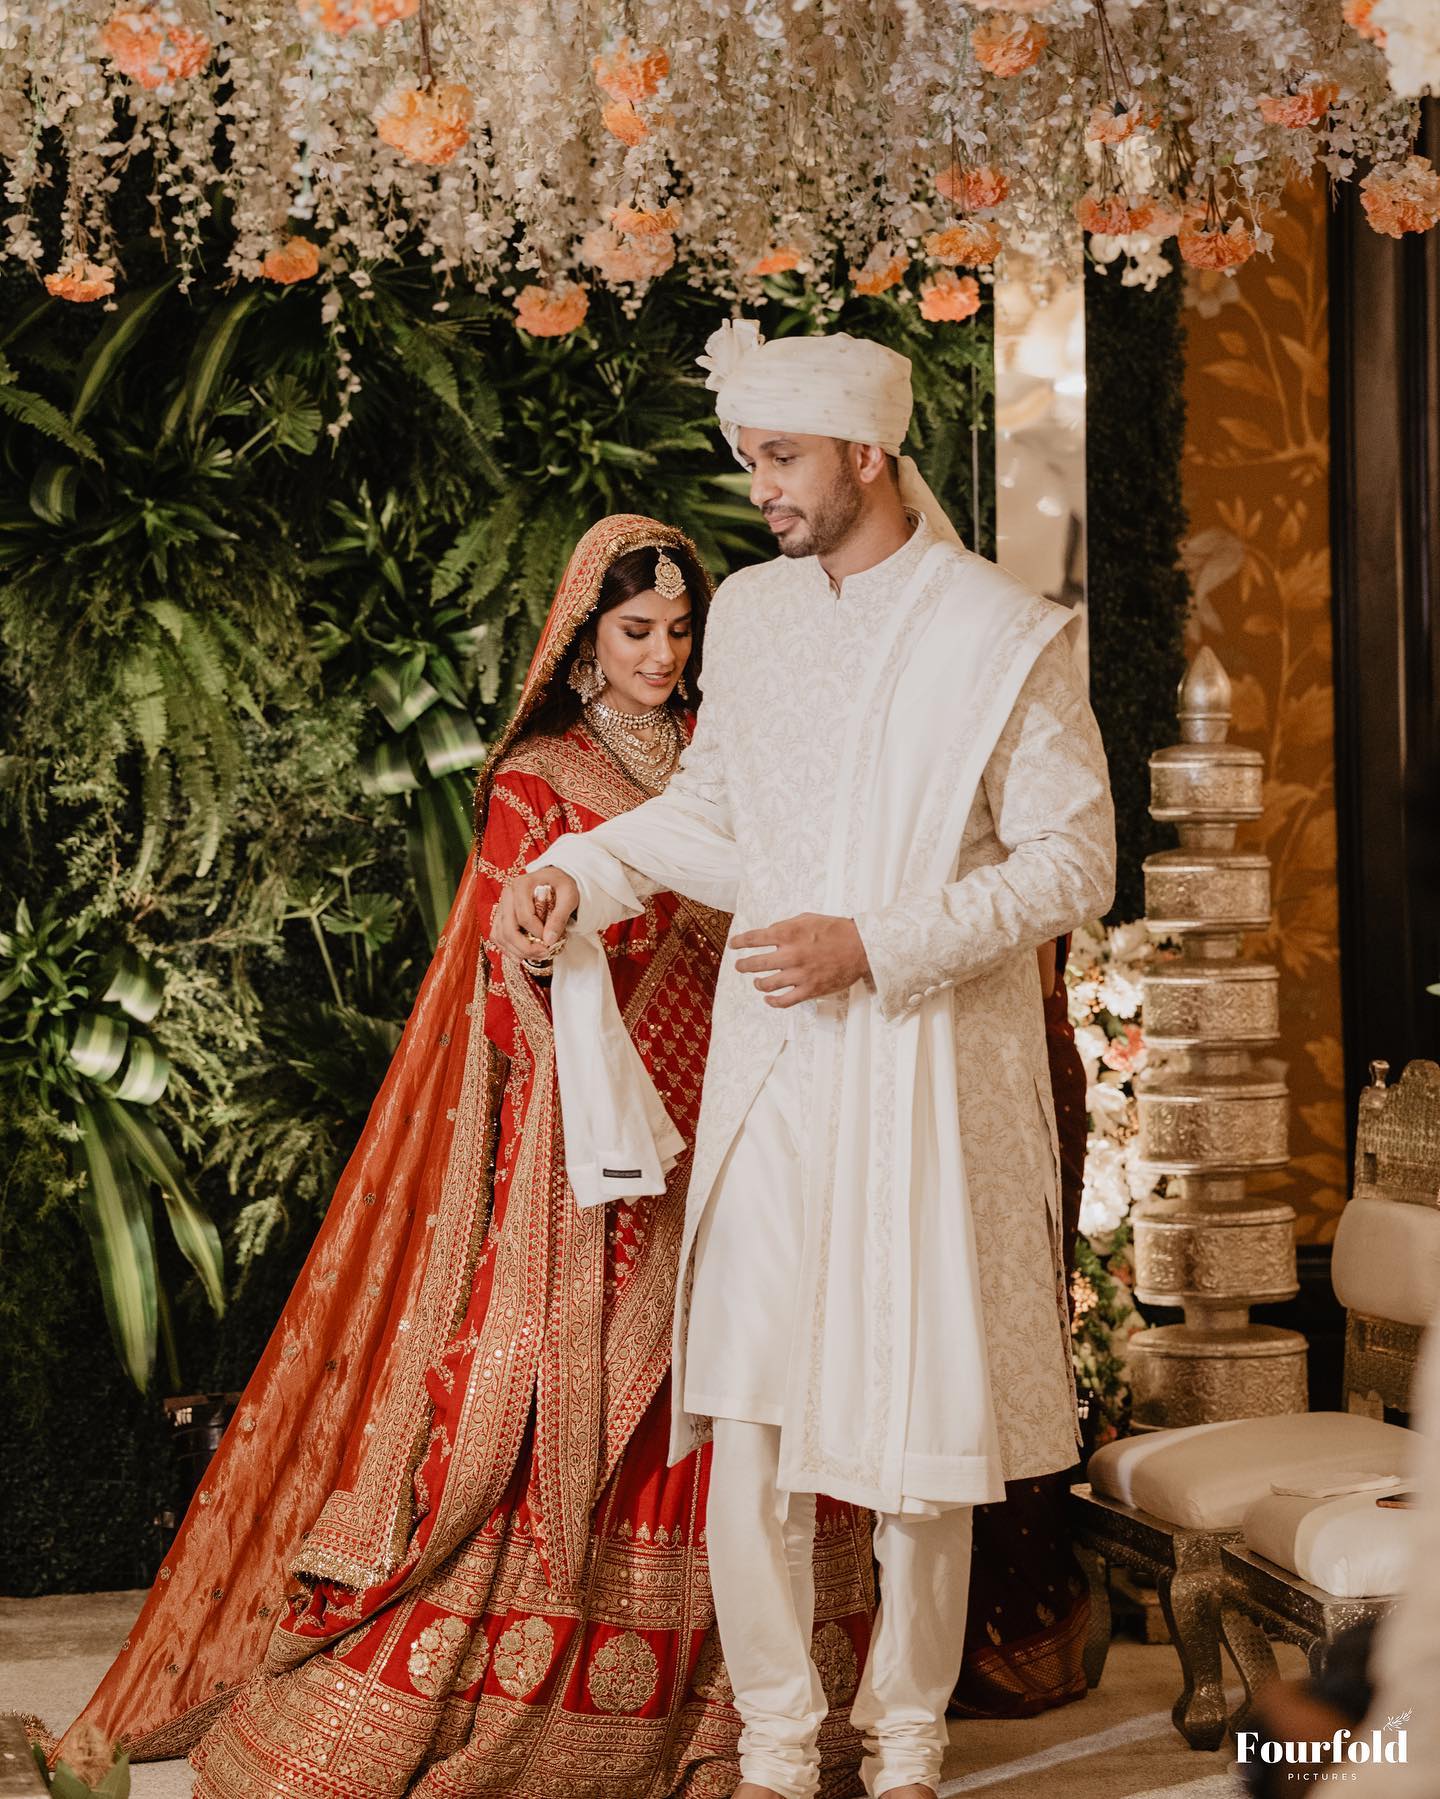 Singer Arjun Kanungo Married Beau Carla And We Absolutely Love Their Wedding Looks!